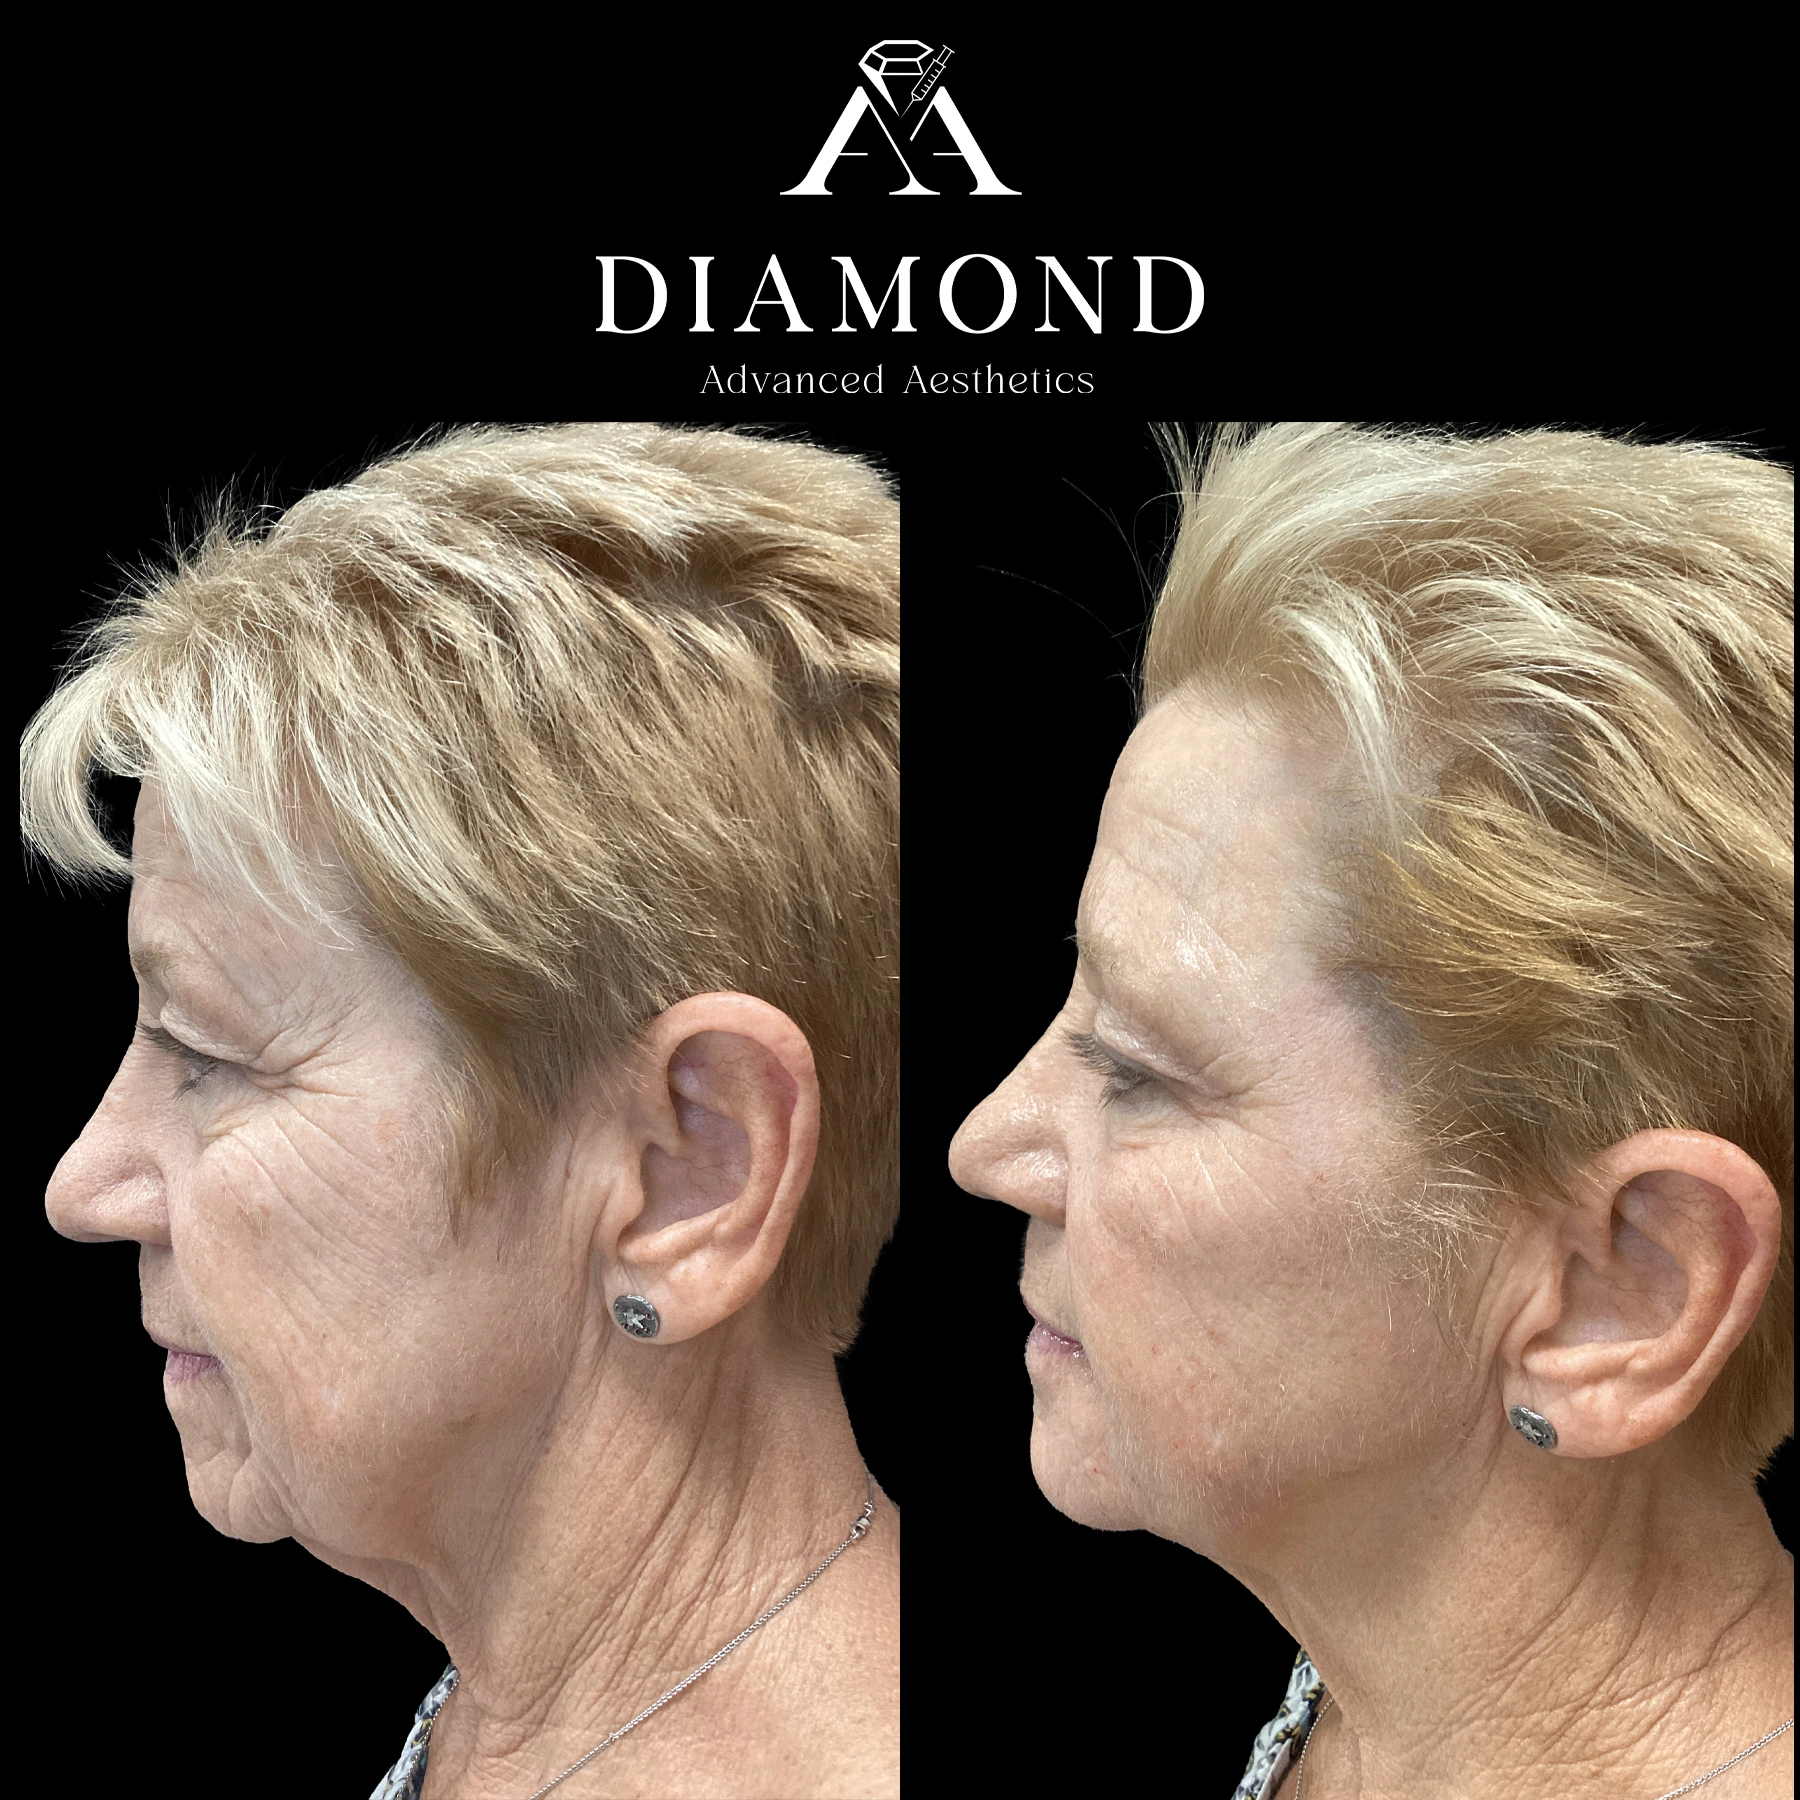 Before and After |diamond advanced aesthetics | New york|